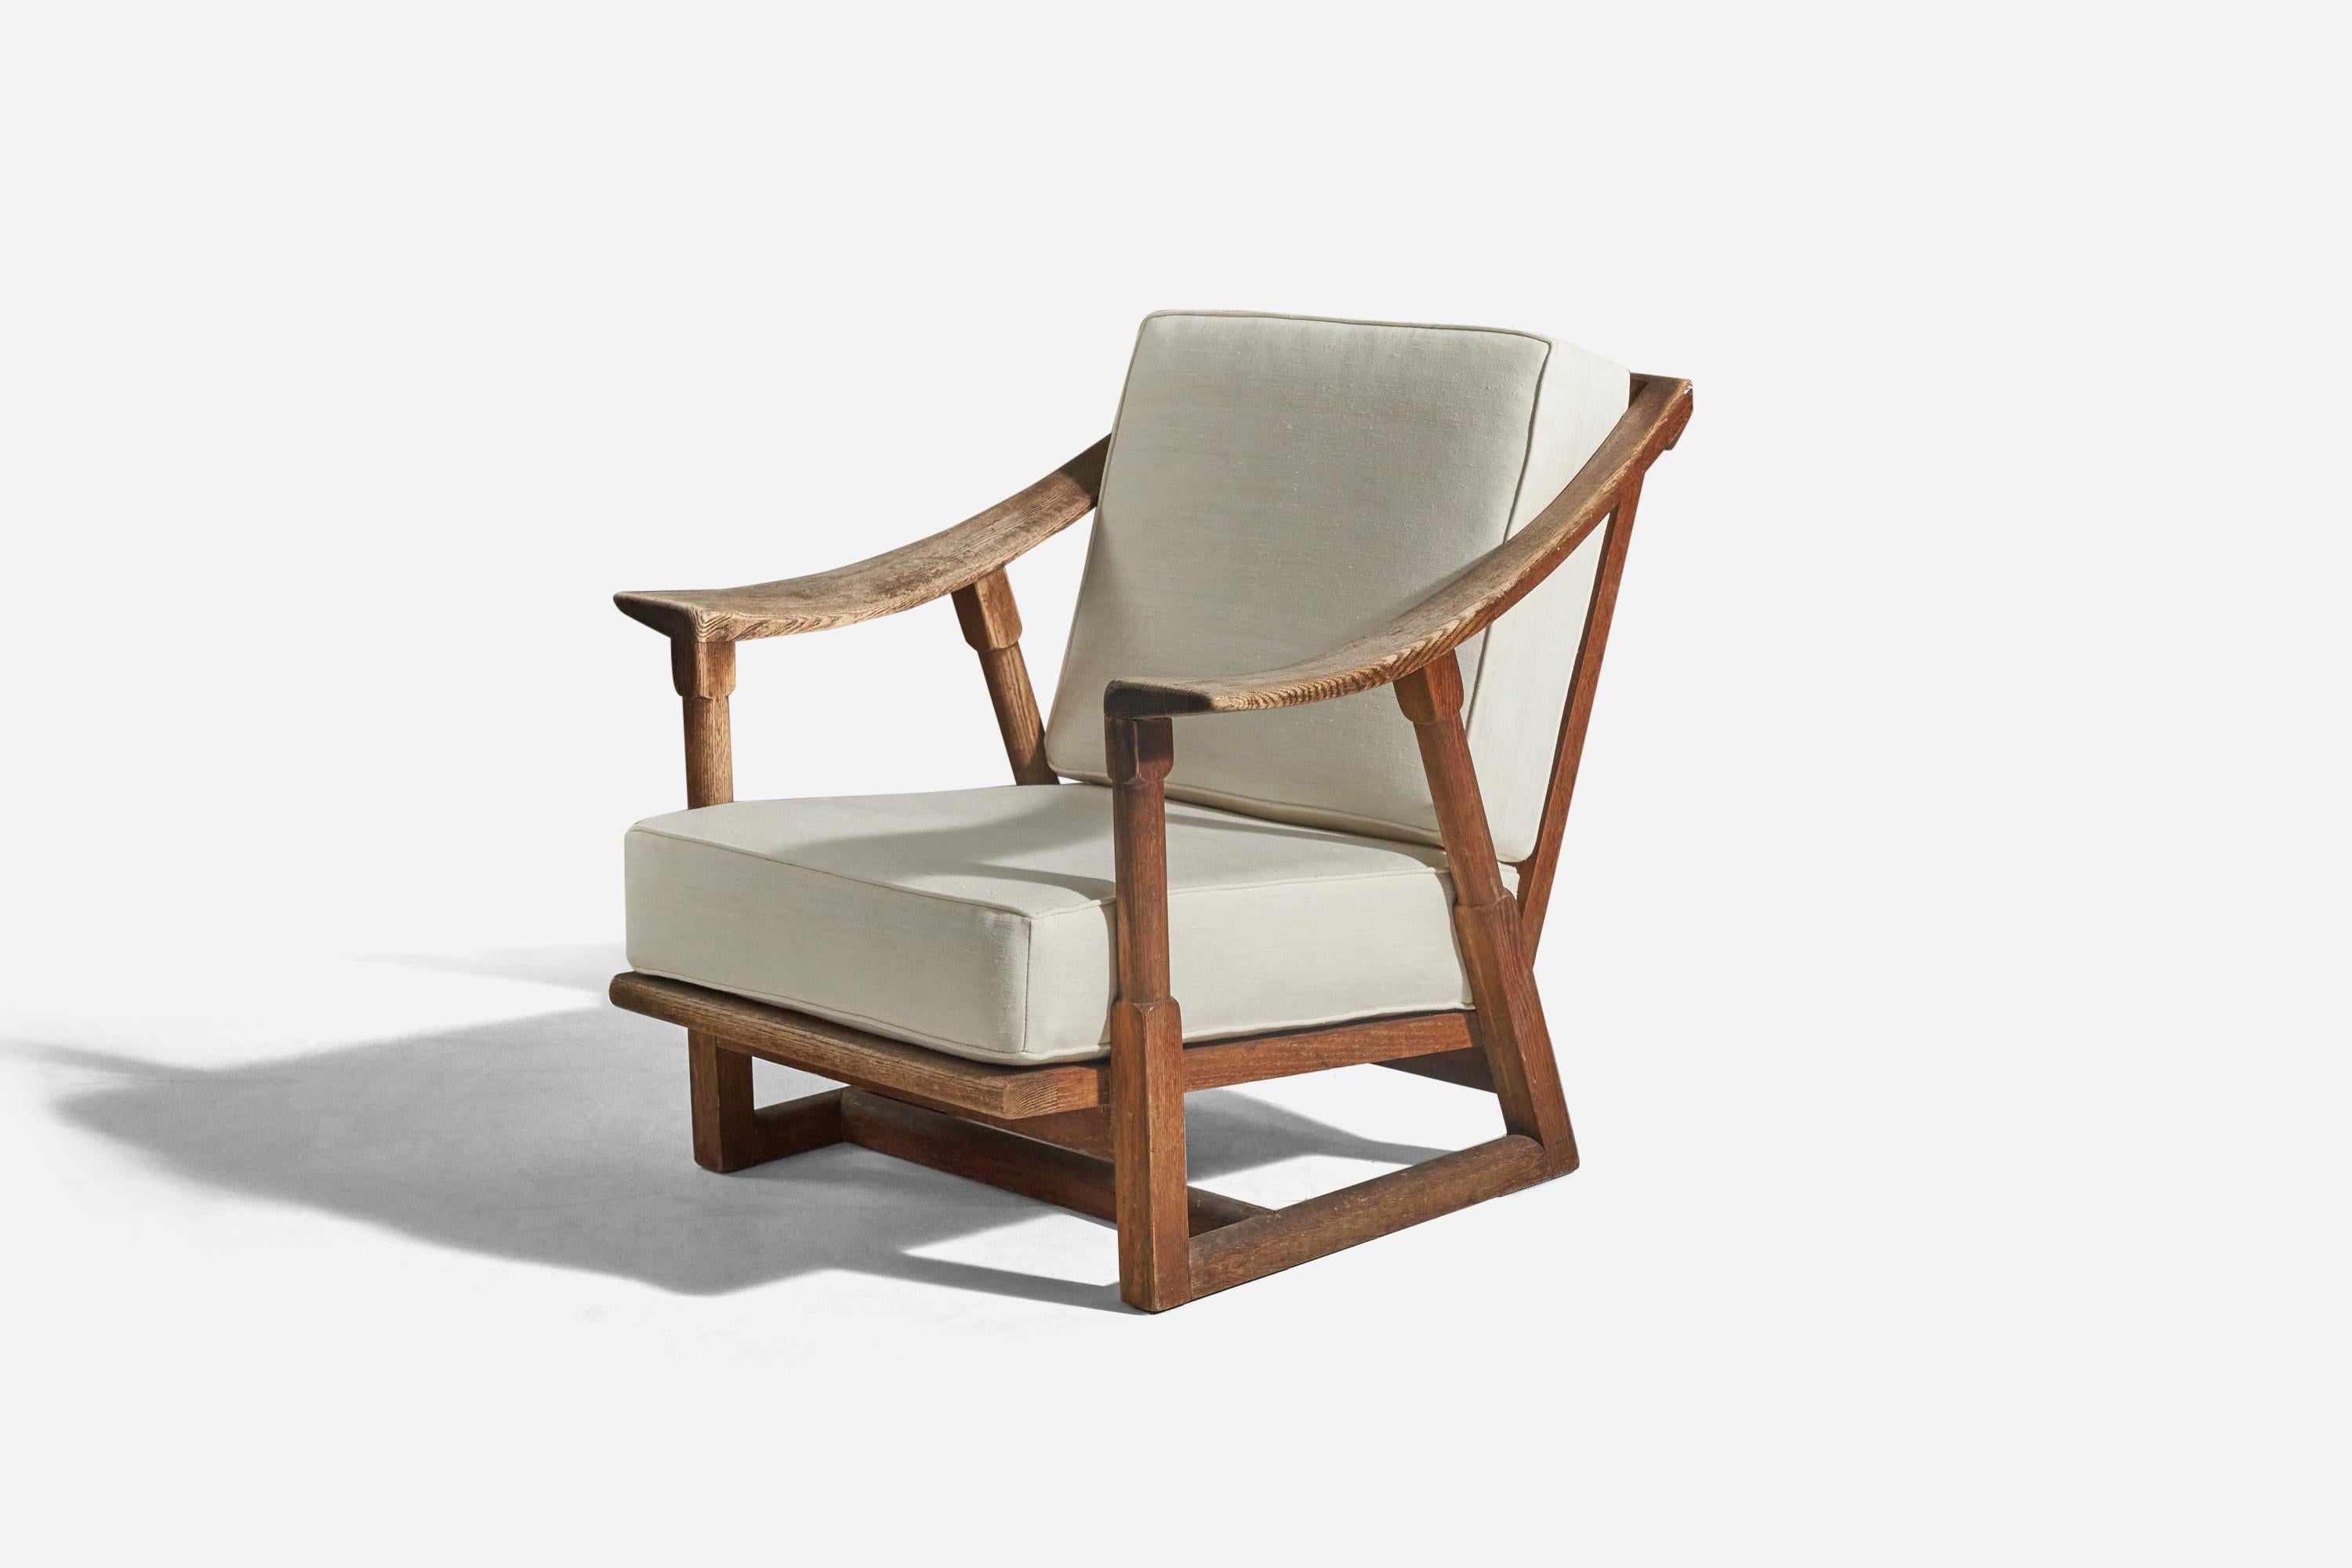 An oak and white fabric lounge chair designed by Jack Van Der Molen and produced by Jamestown Lounge Company, United States, c. 1950s. 





